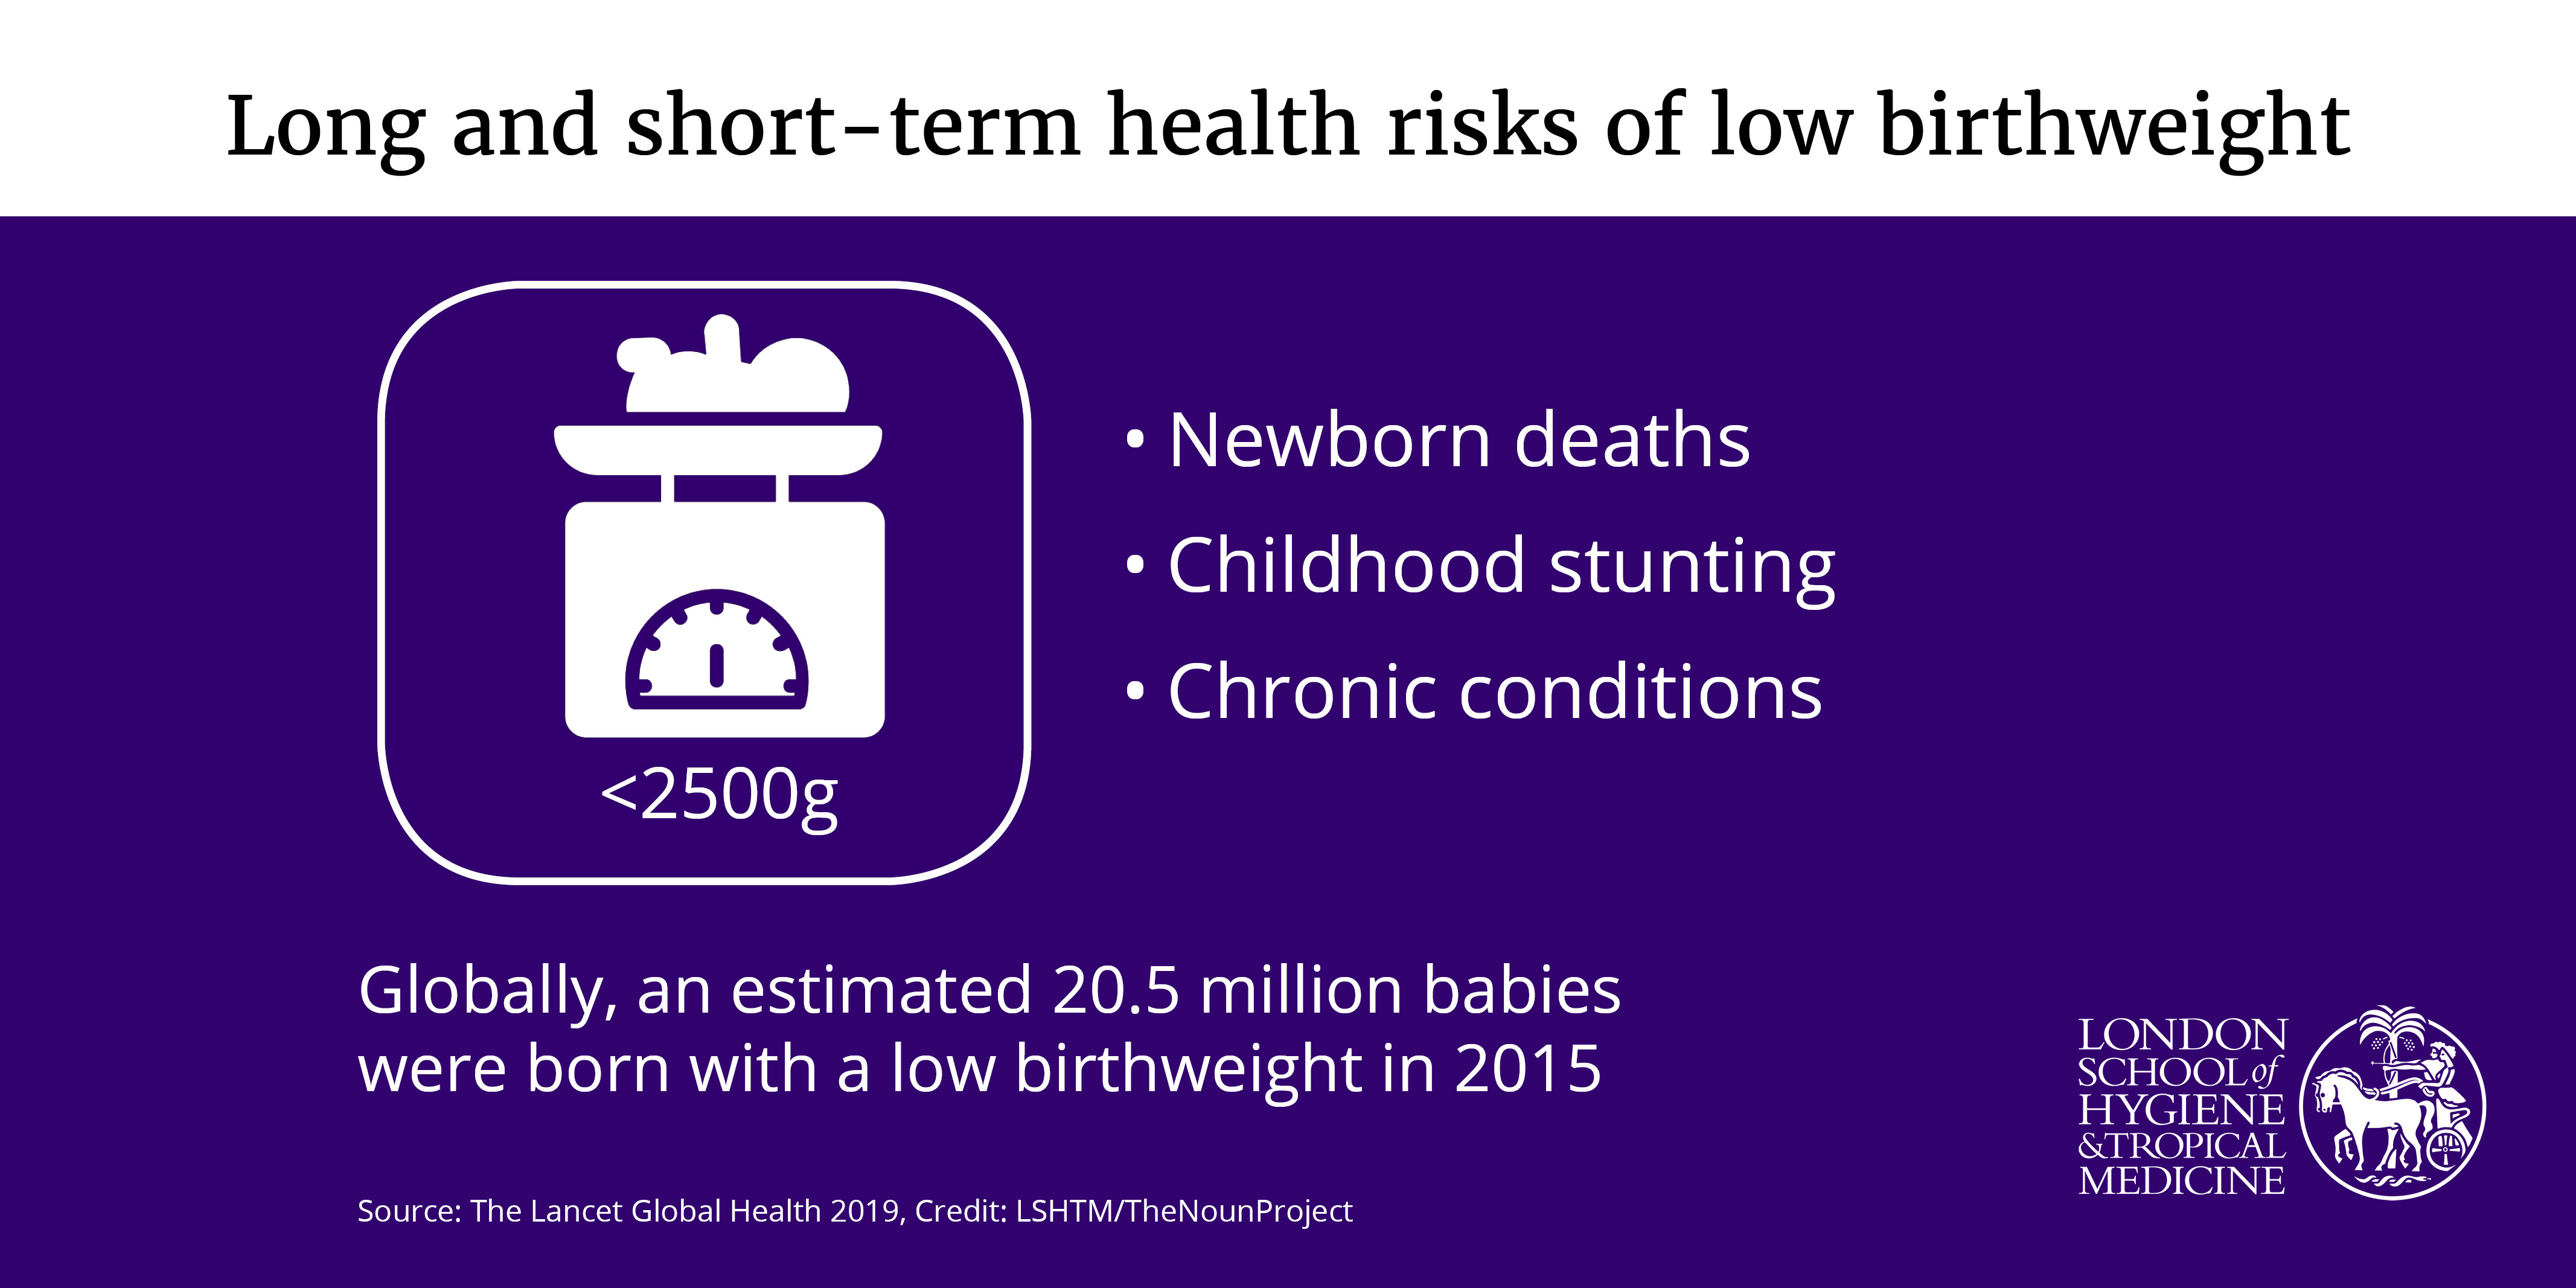 Long and short-term health risks of low birthweight